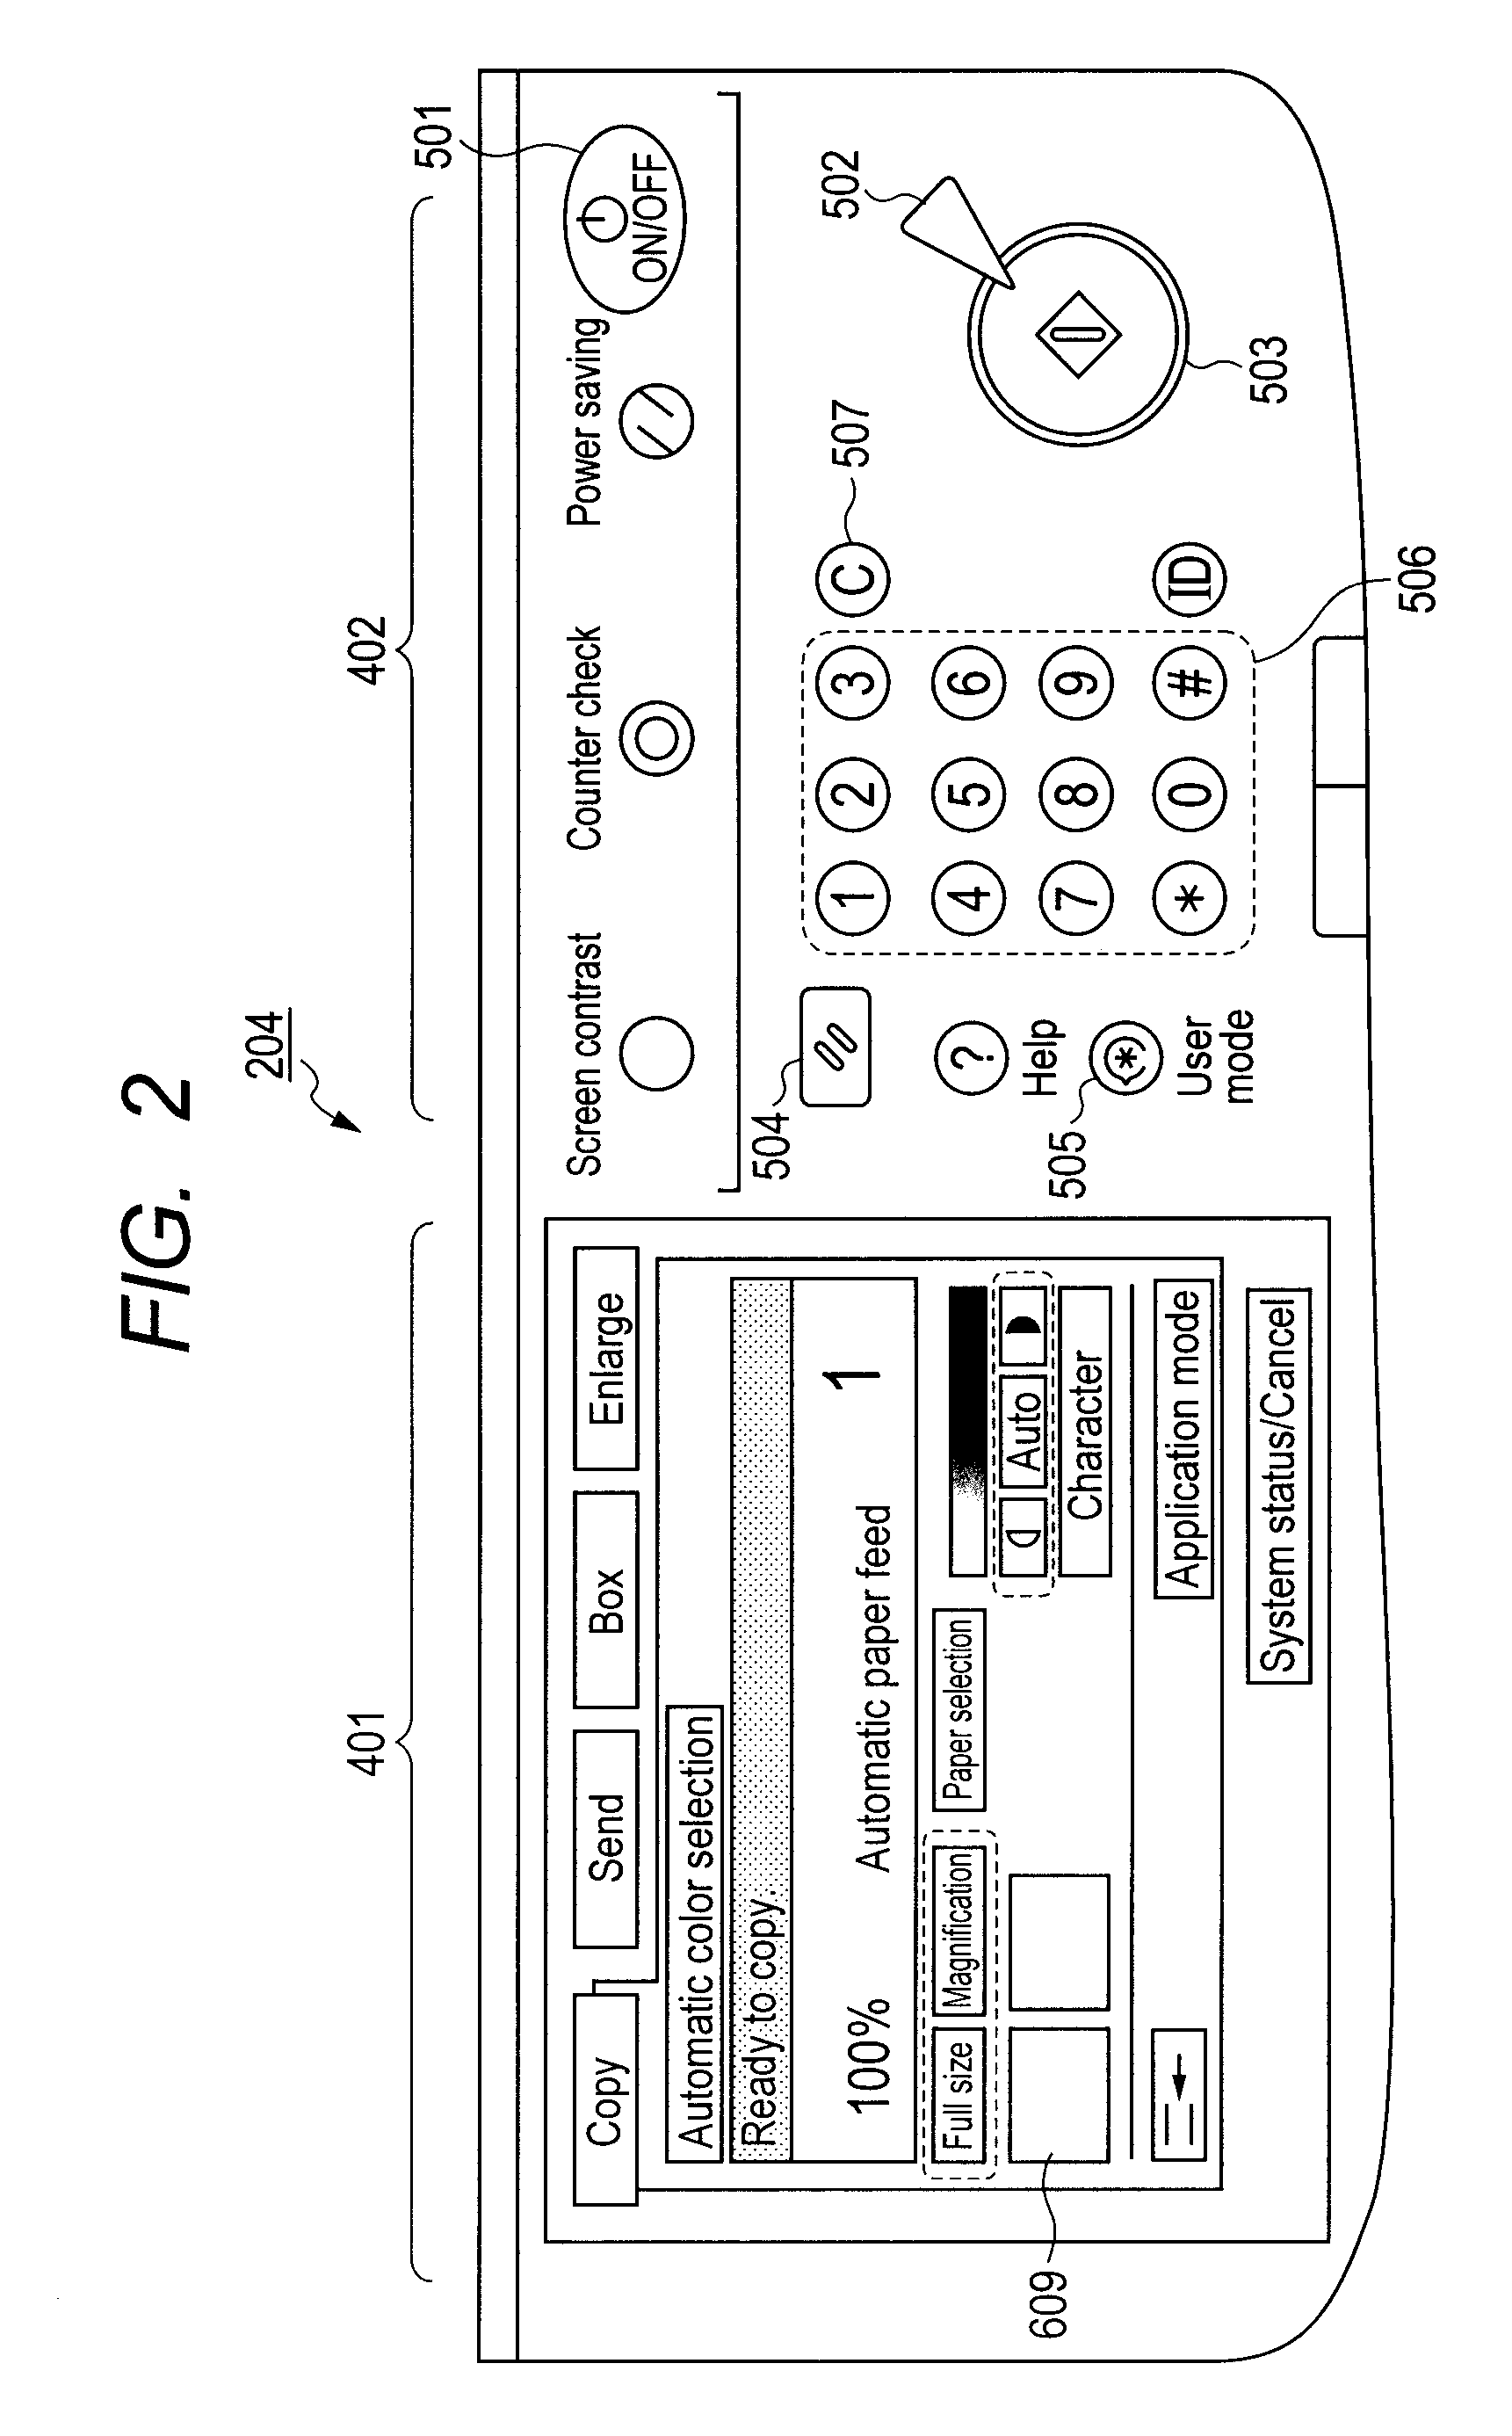 Image processing apparatus and image processing method therefor